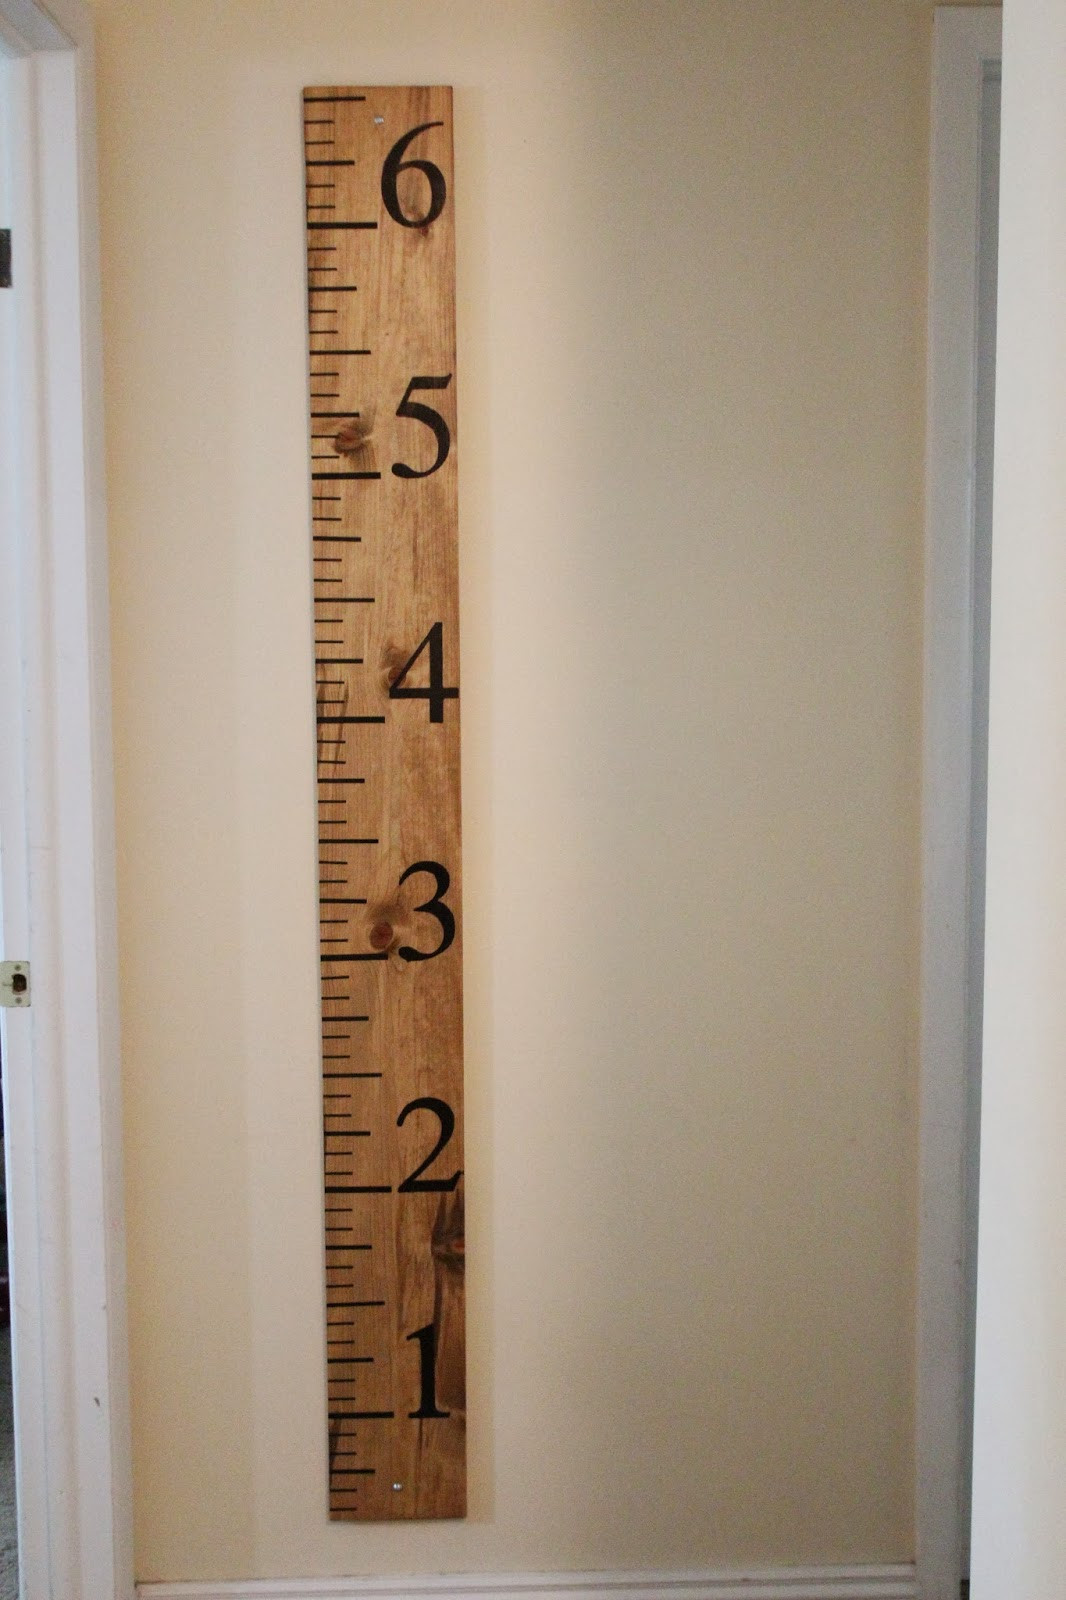 DIY Growth Chart Wood
 Mommy Vignettes Wood Growth Chart Tutorial